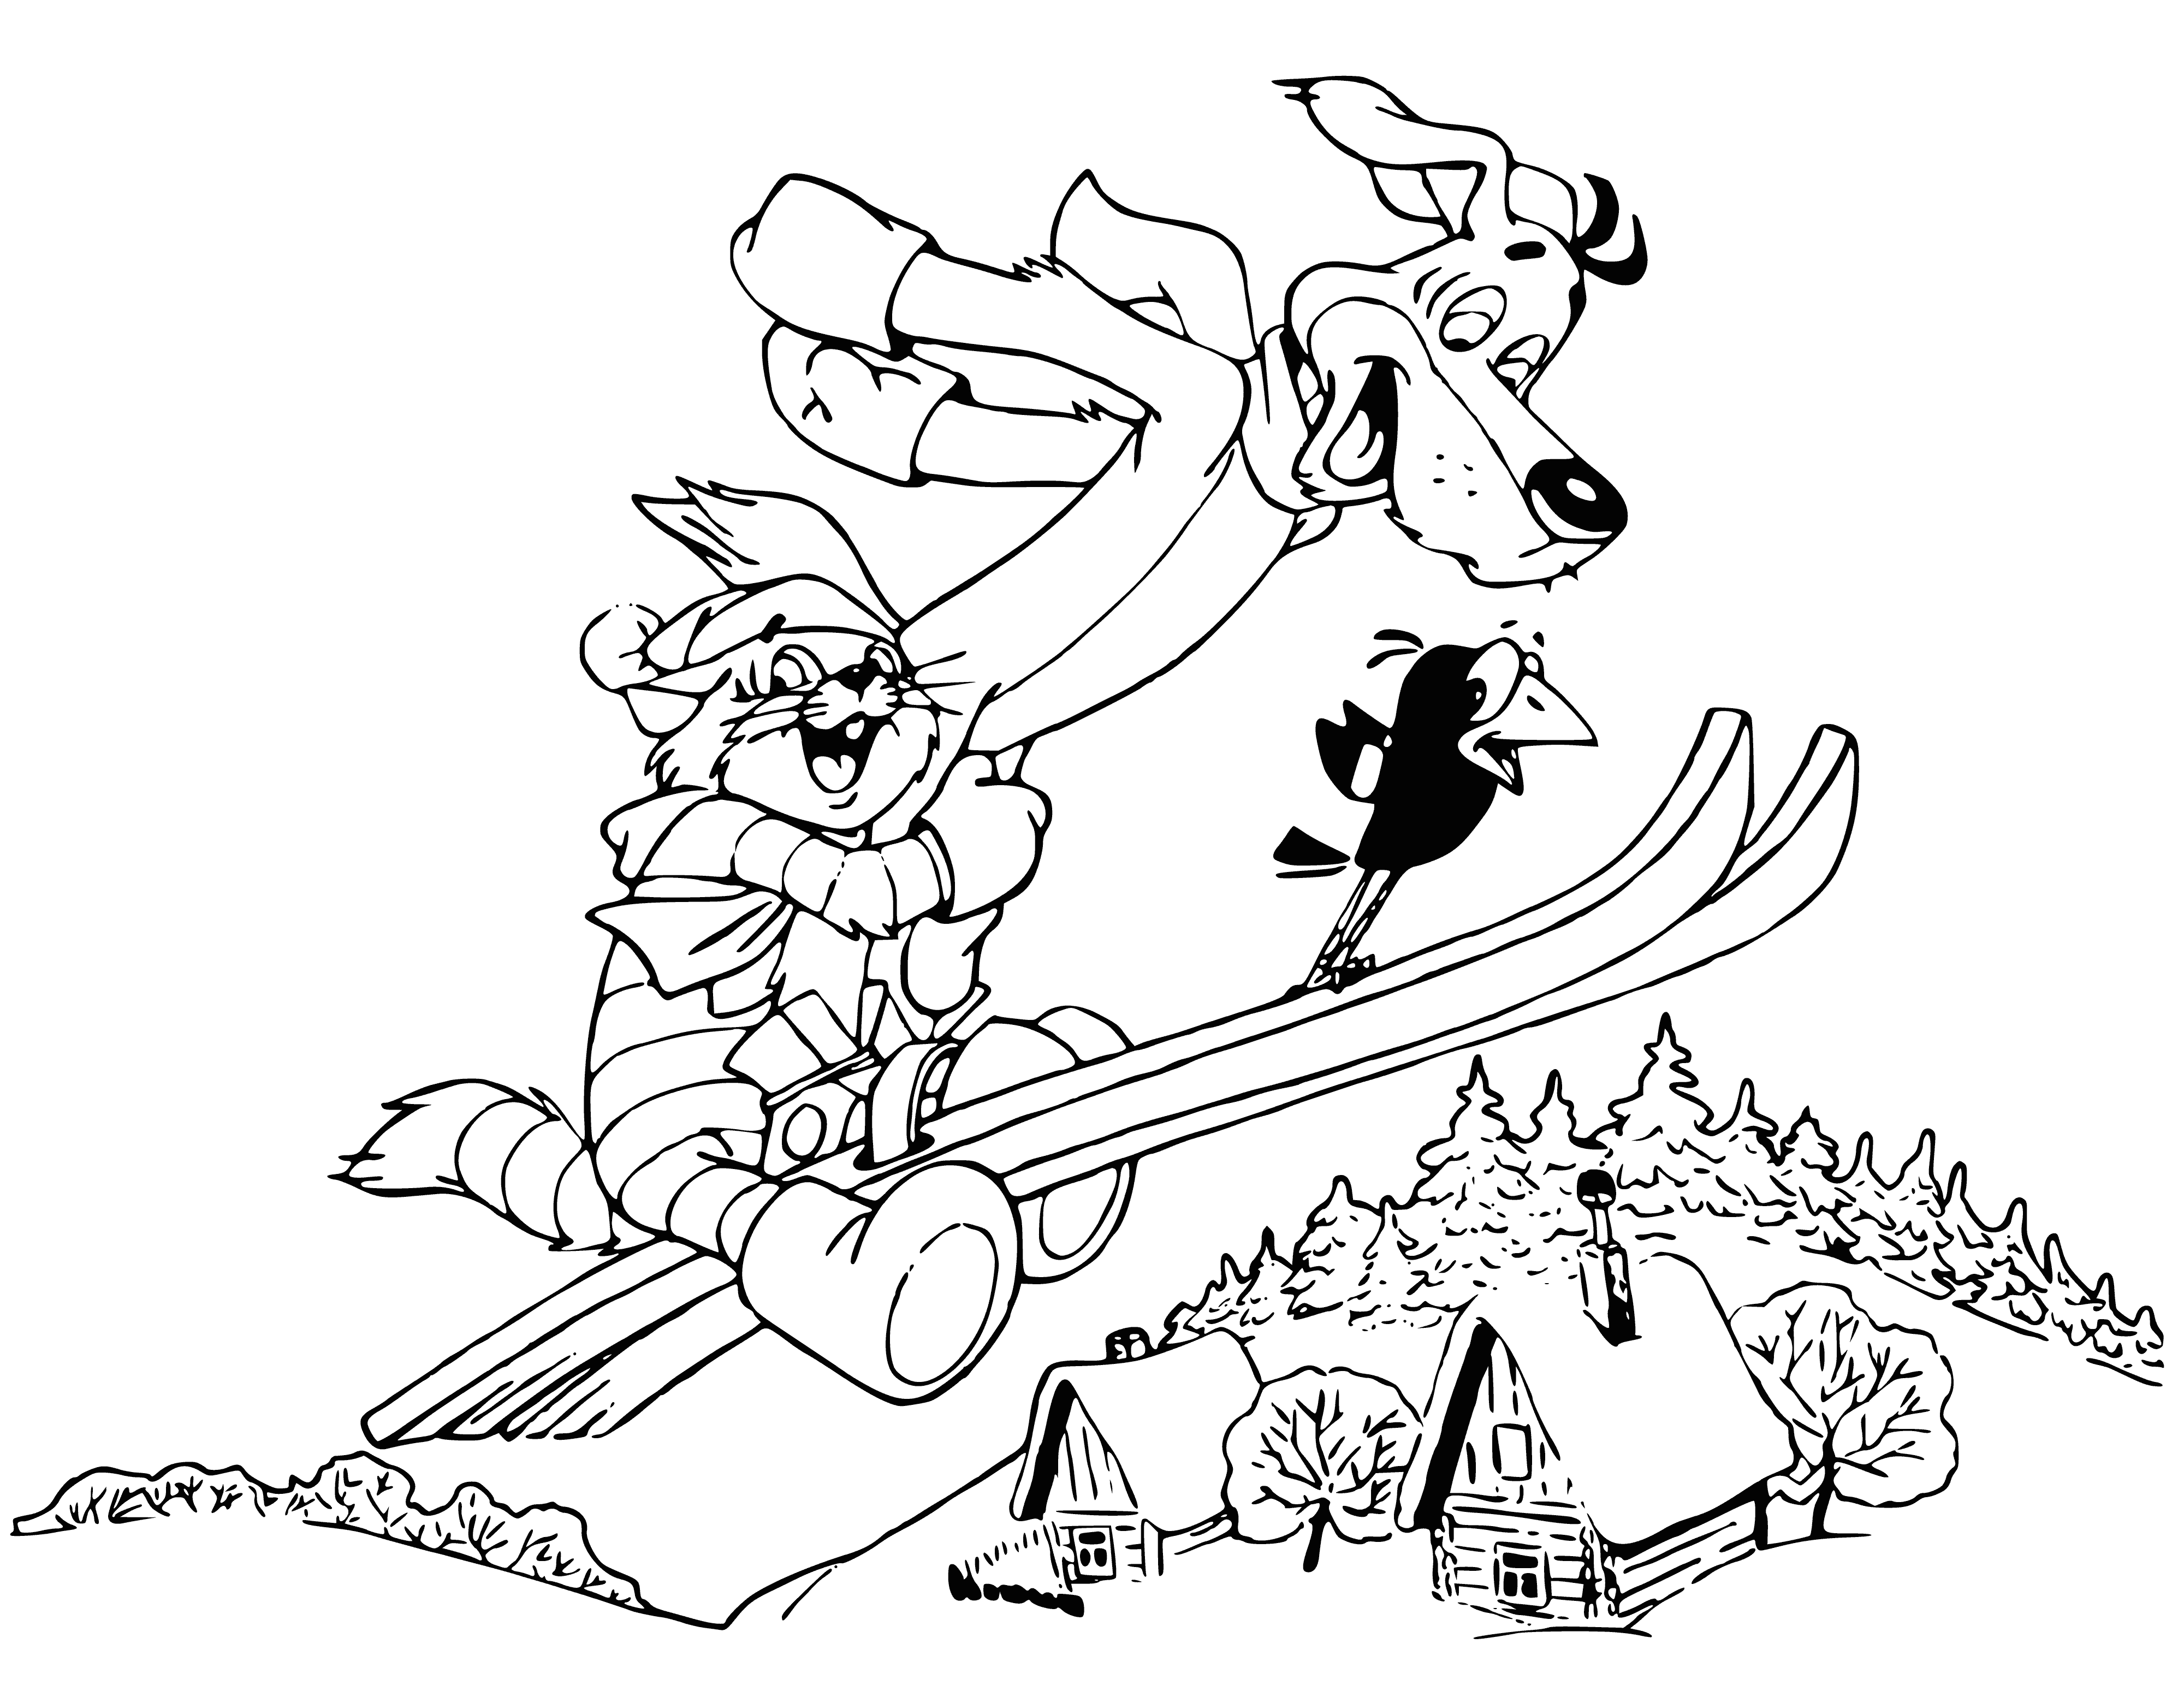 coloring page: Two furry friends ski on a field with a few trees; one wearing red, the other wearing blue.